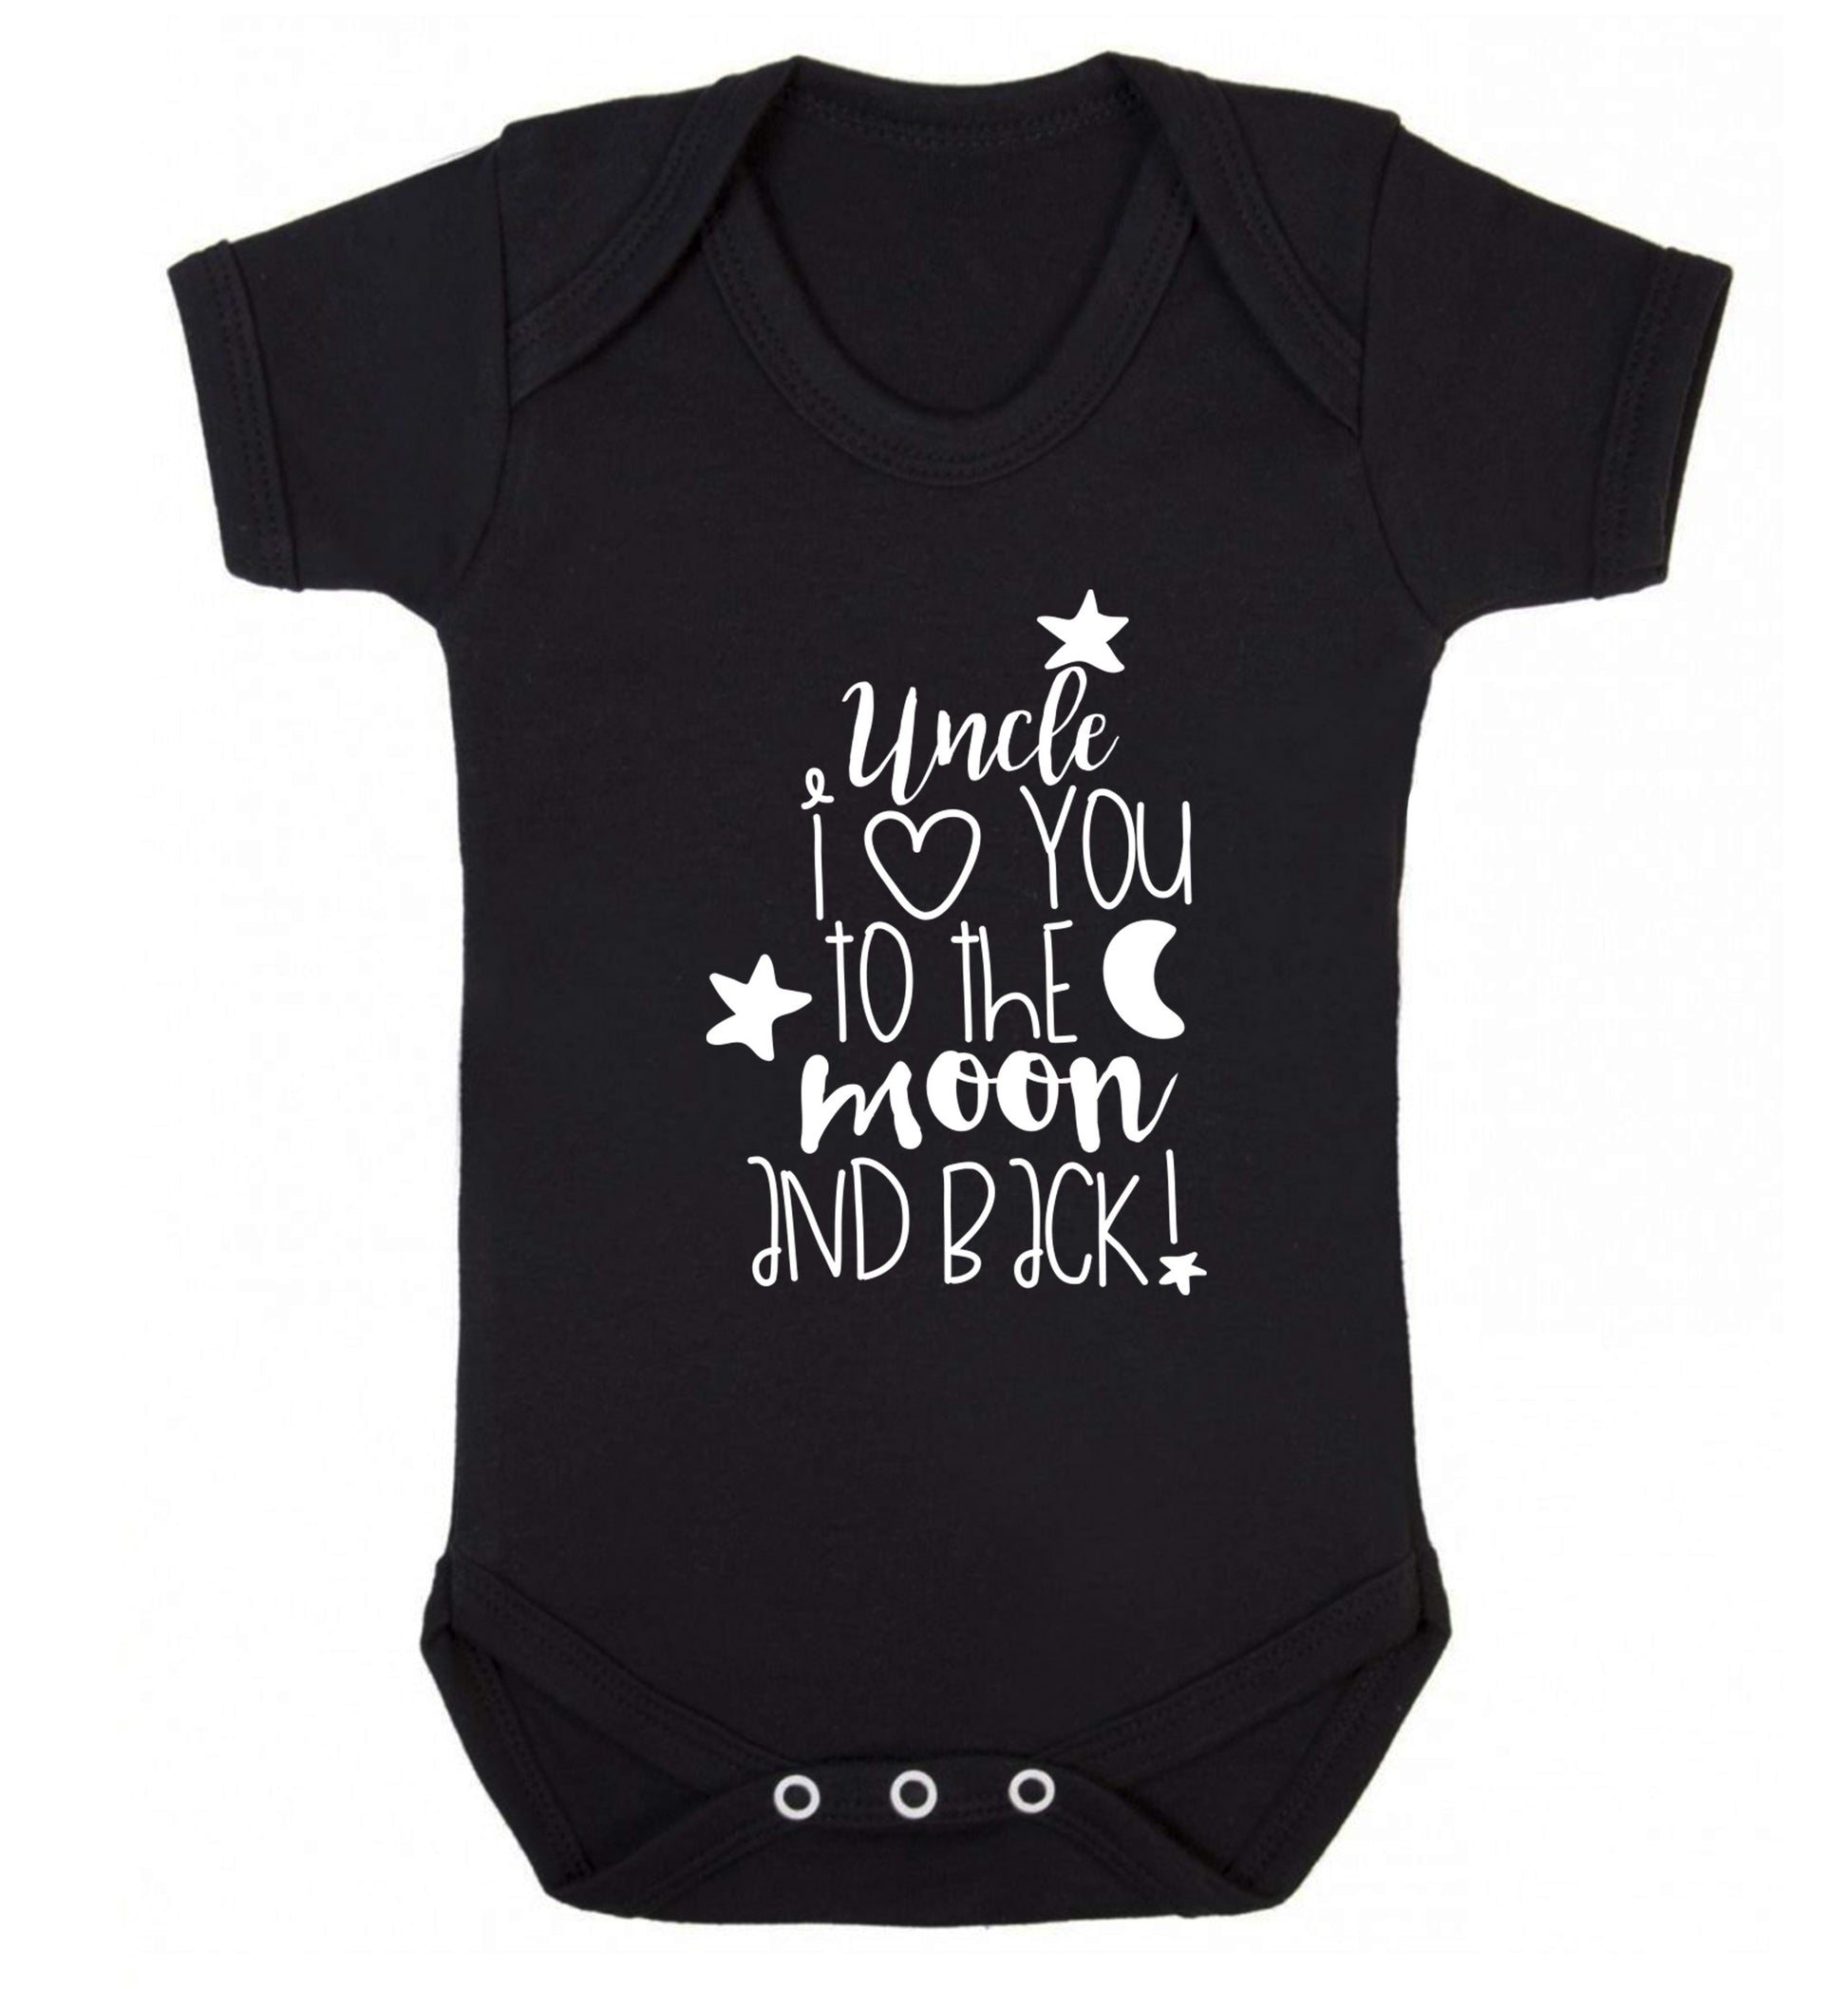 Uncle I love you to the moon and back Baby Vest black 18-24 months